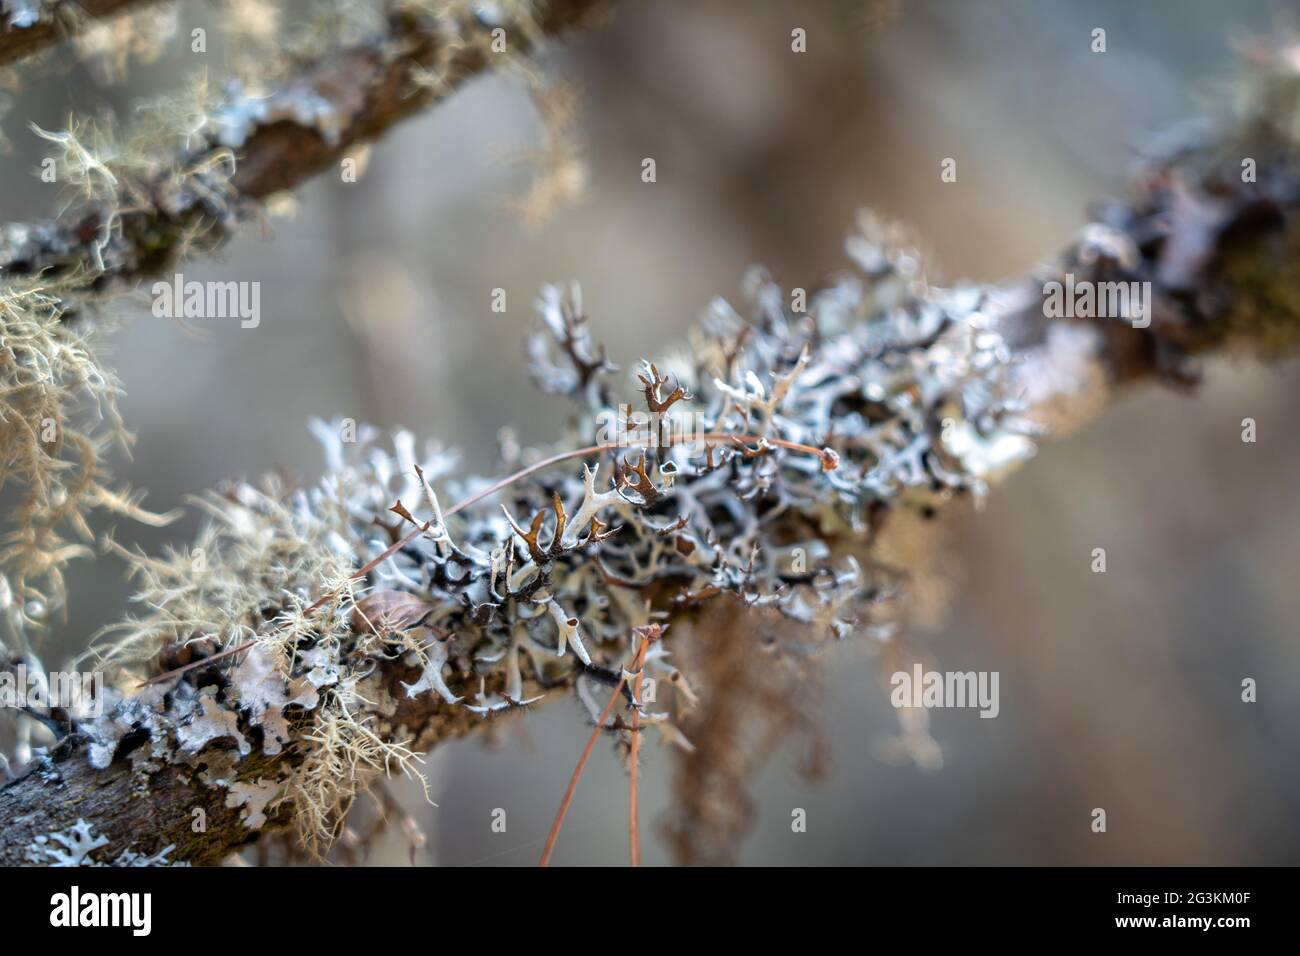 Closeup shot of lichens on a tree branch Stock Photo